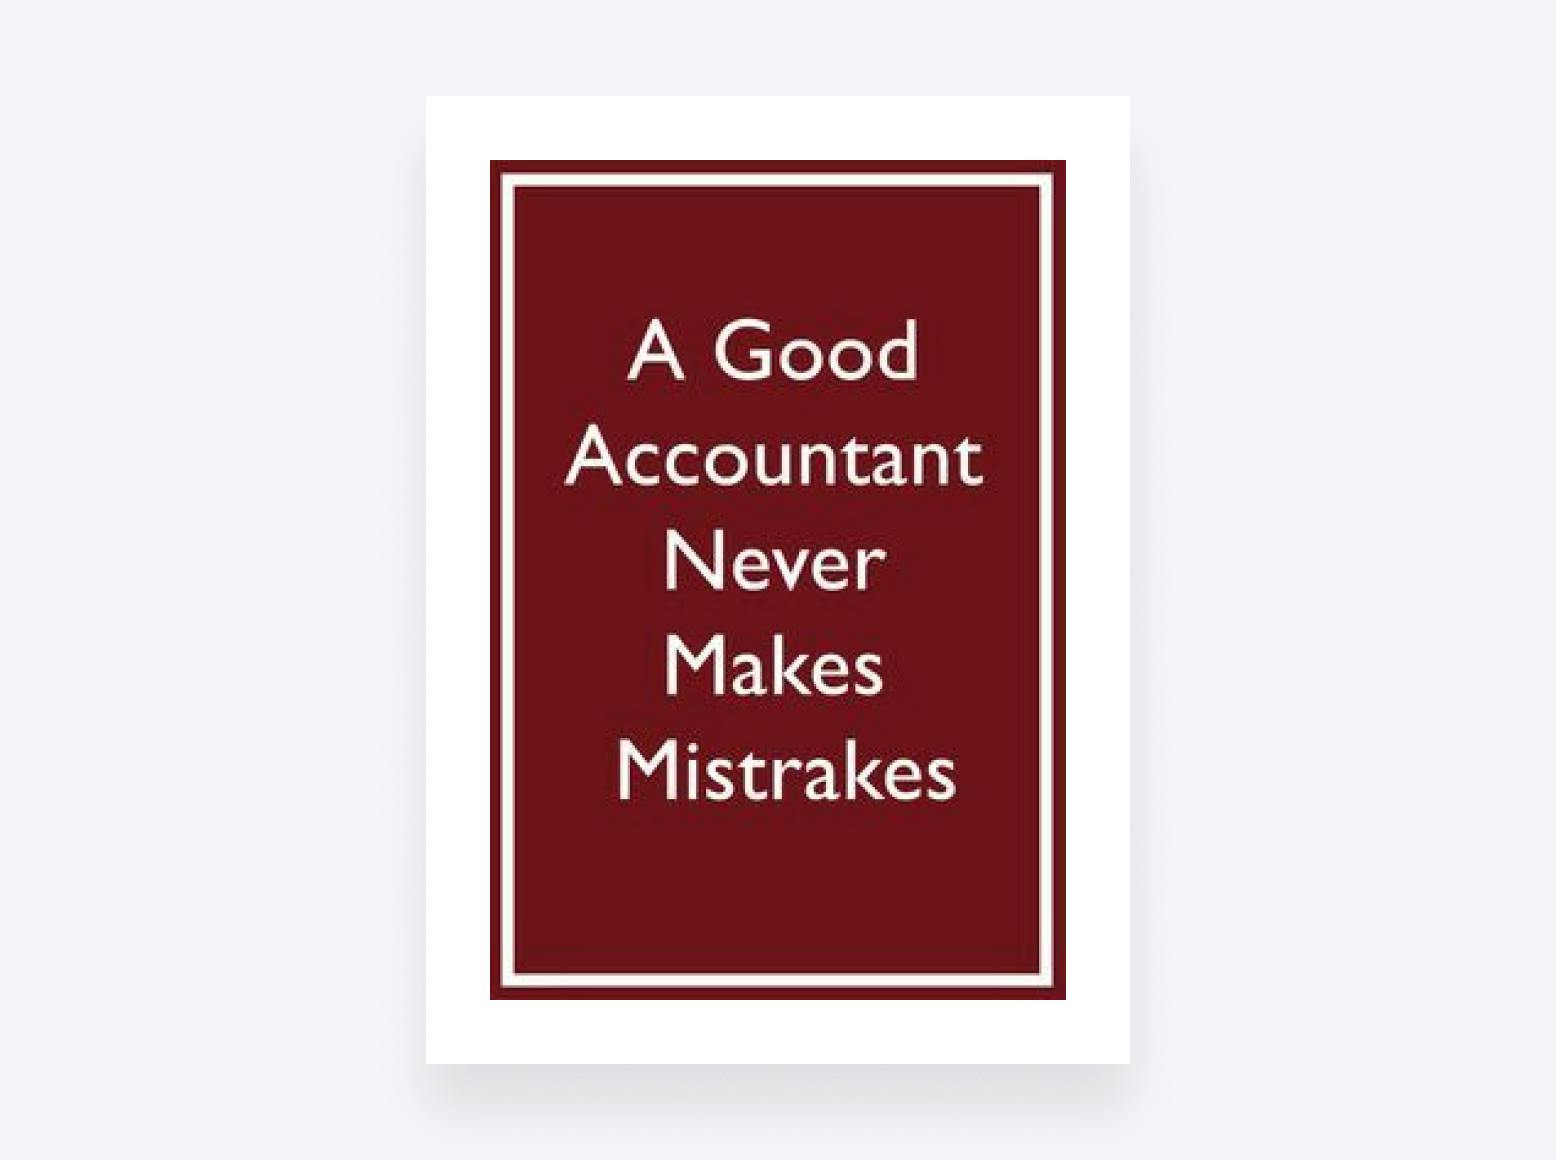 Accounting meme of how perfect accountants are